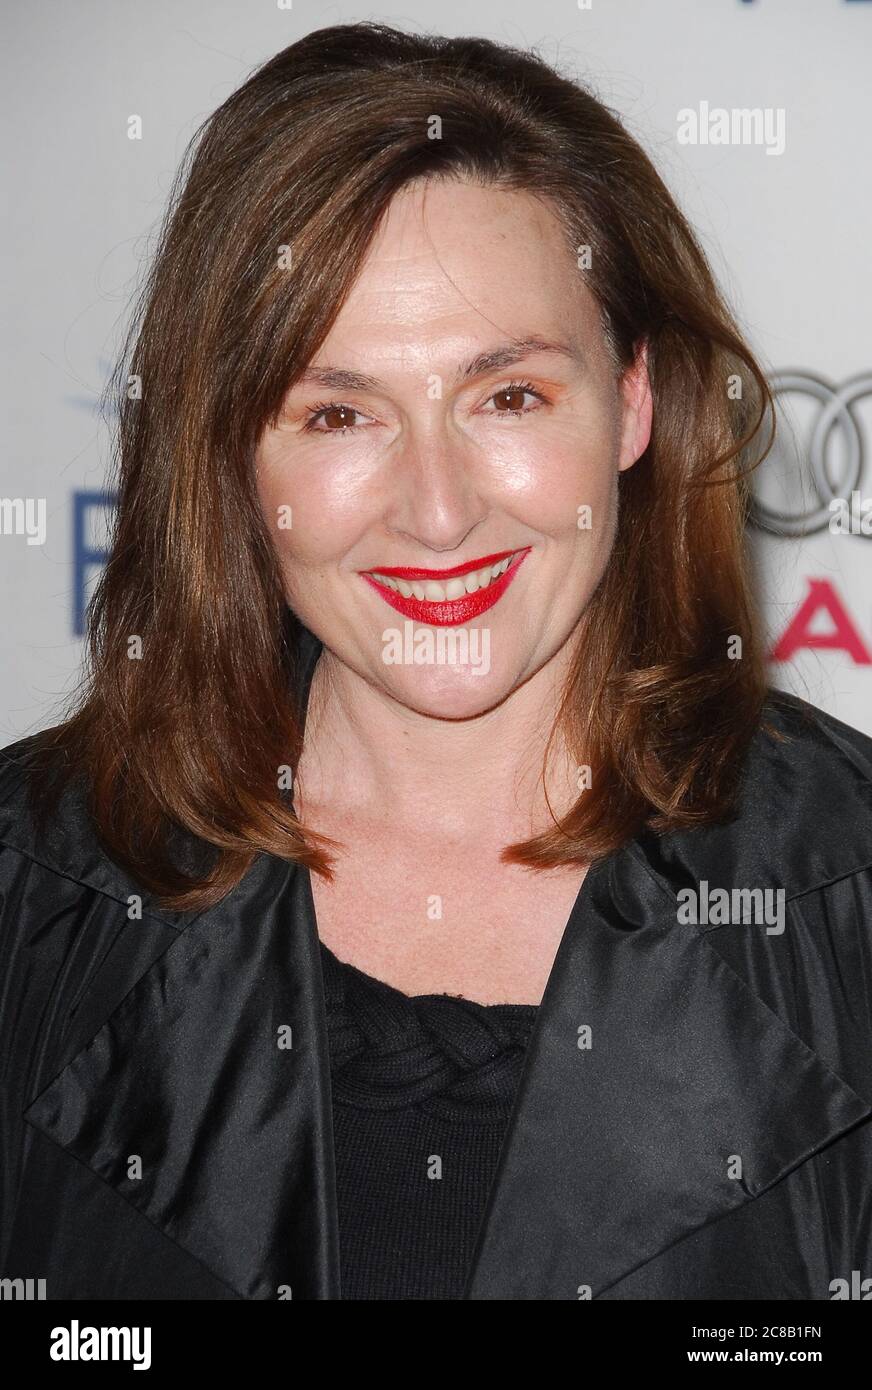 Nora Dunn at the AFI FEST 2007 Presents a Screening of 